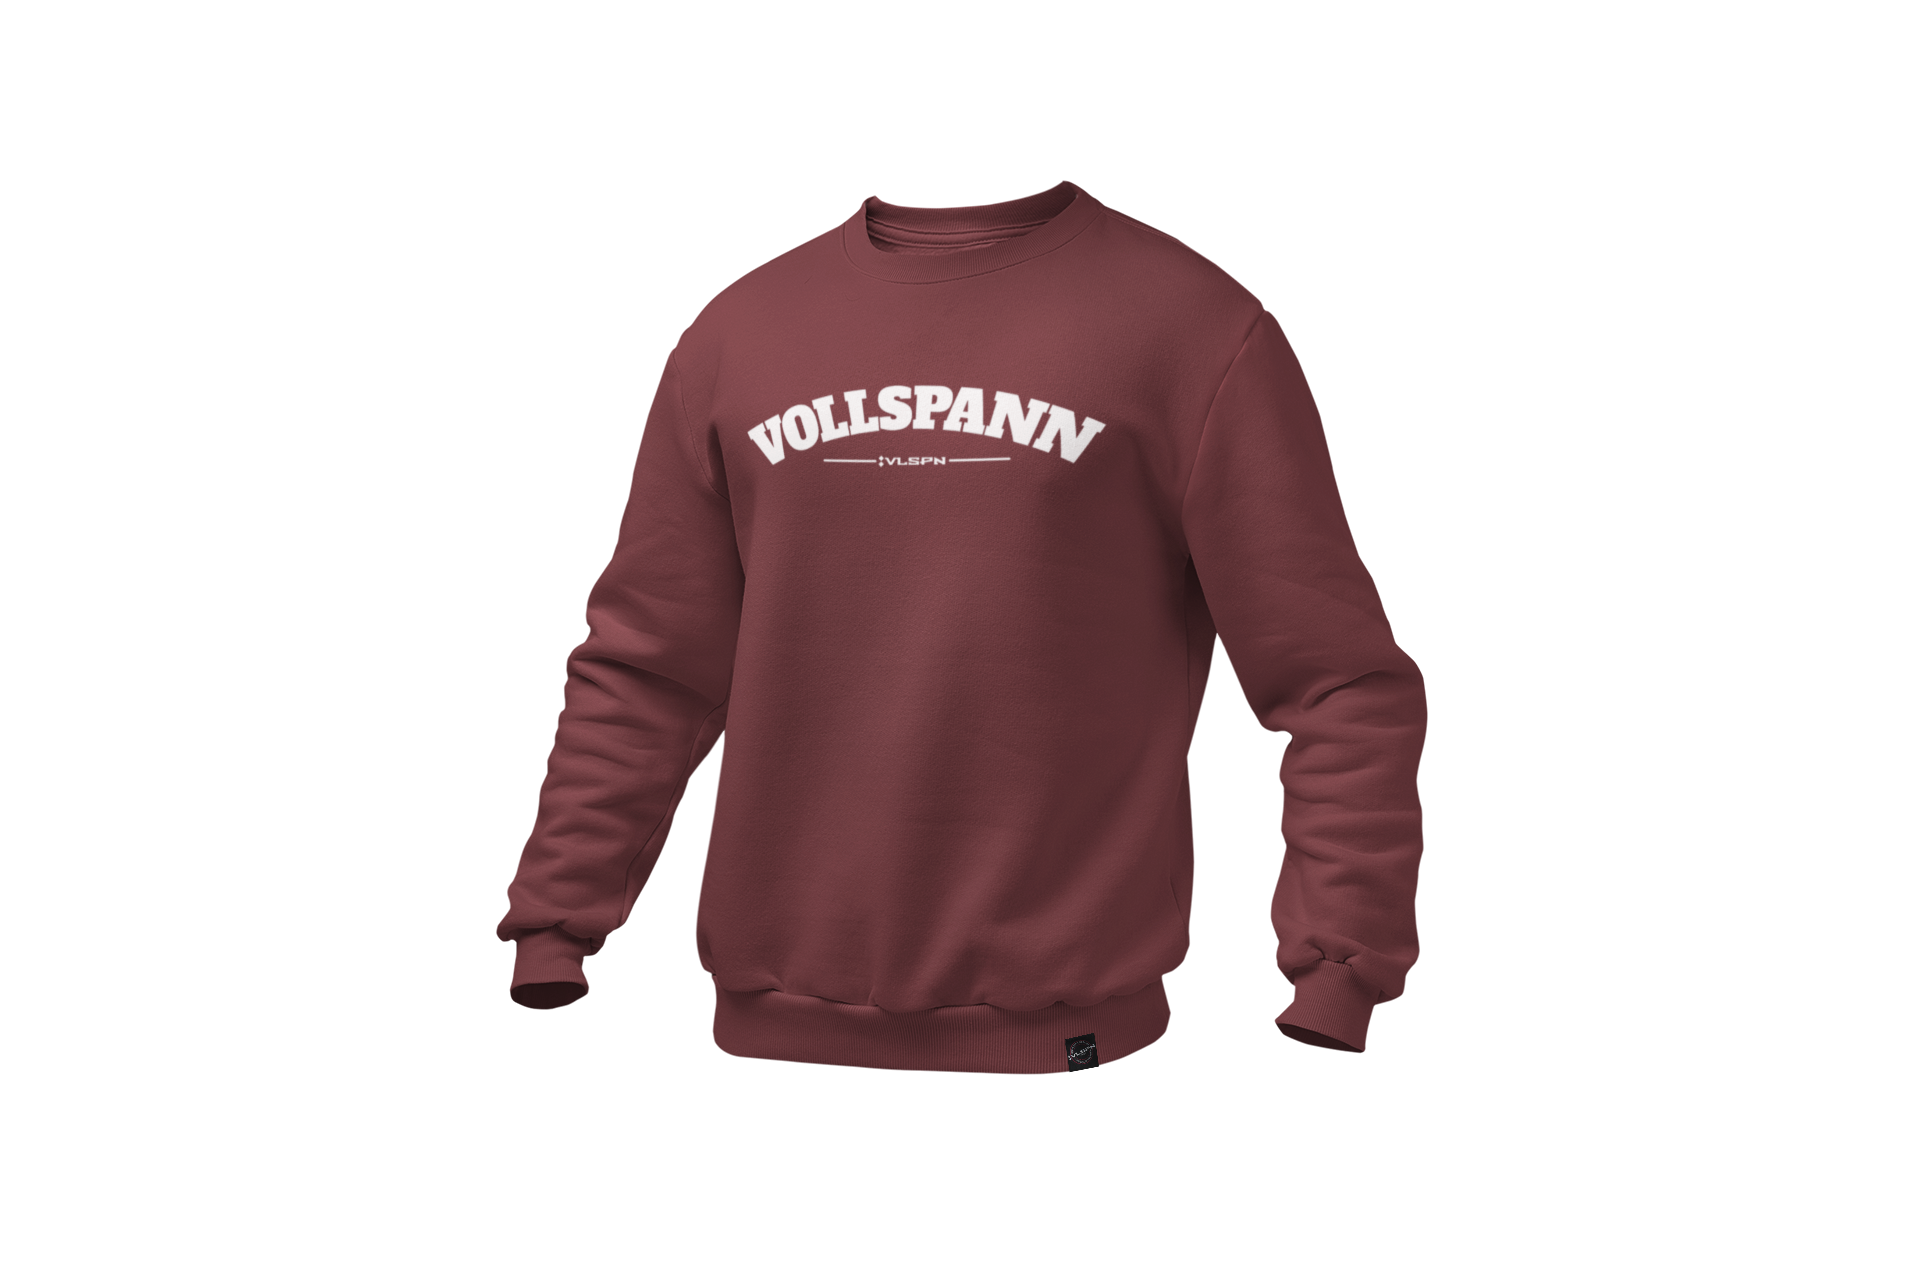 mockup-of-a-ghosted-crewneck-sweatshirt-over-a-solid-background-26960 (60).png